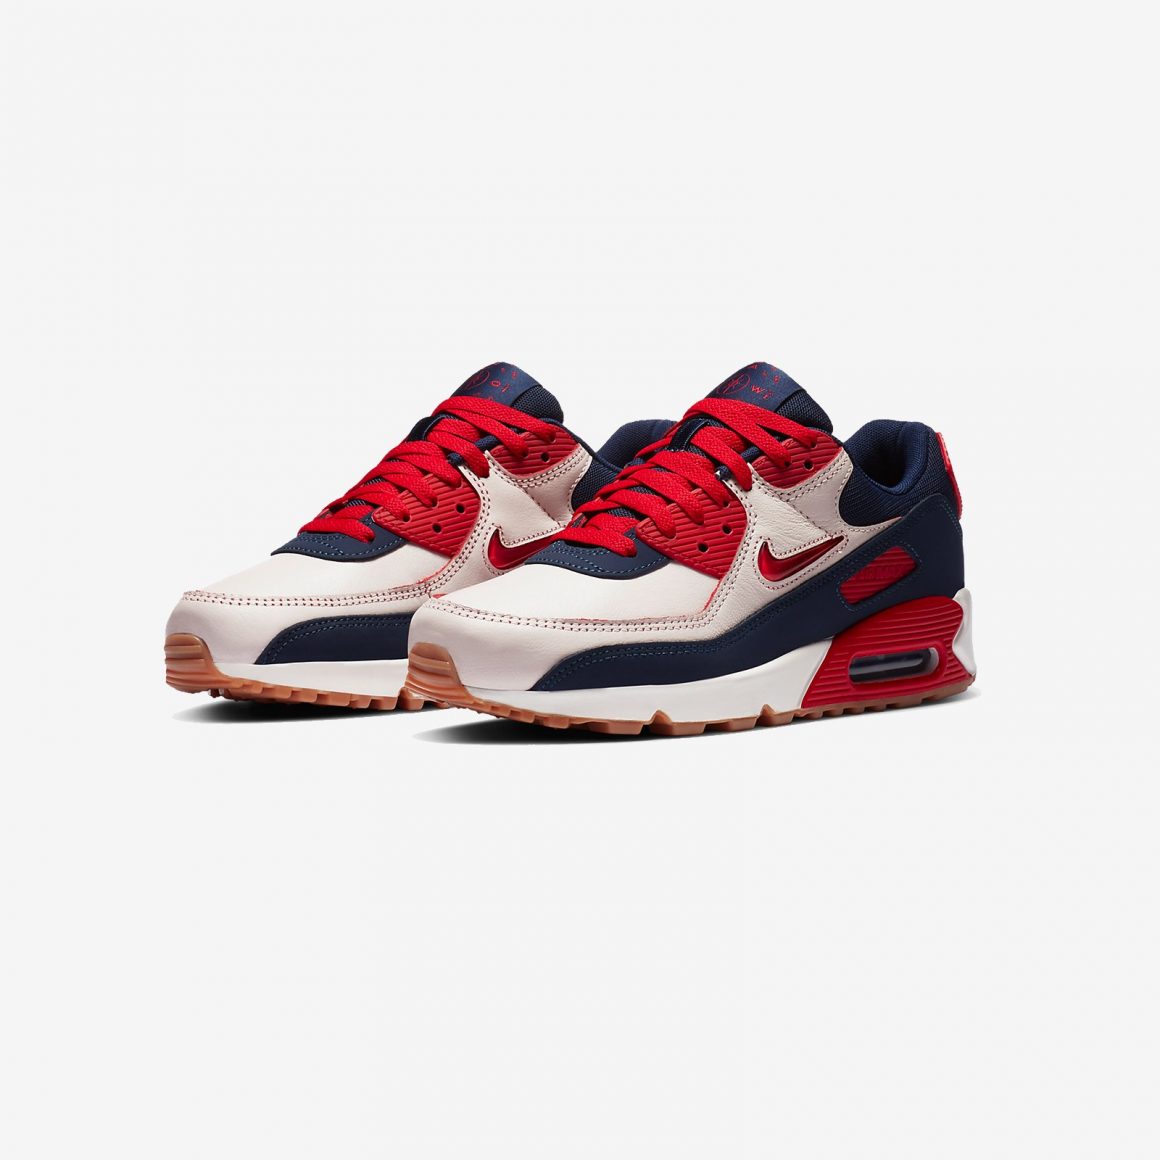 Nike Air Max 90 PRM ‘’Home and Away’’ - ‘’University Red’’ - CJ0611-101